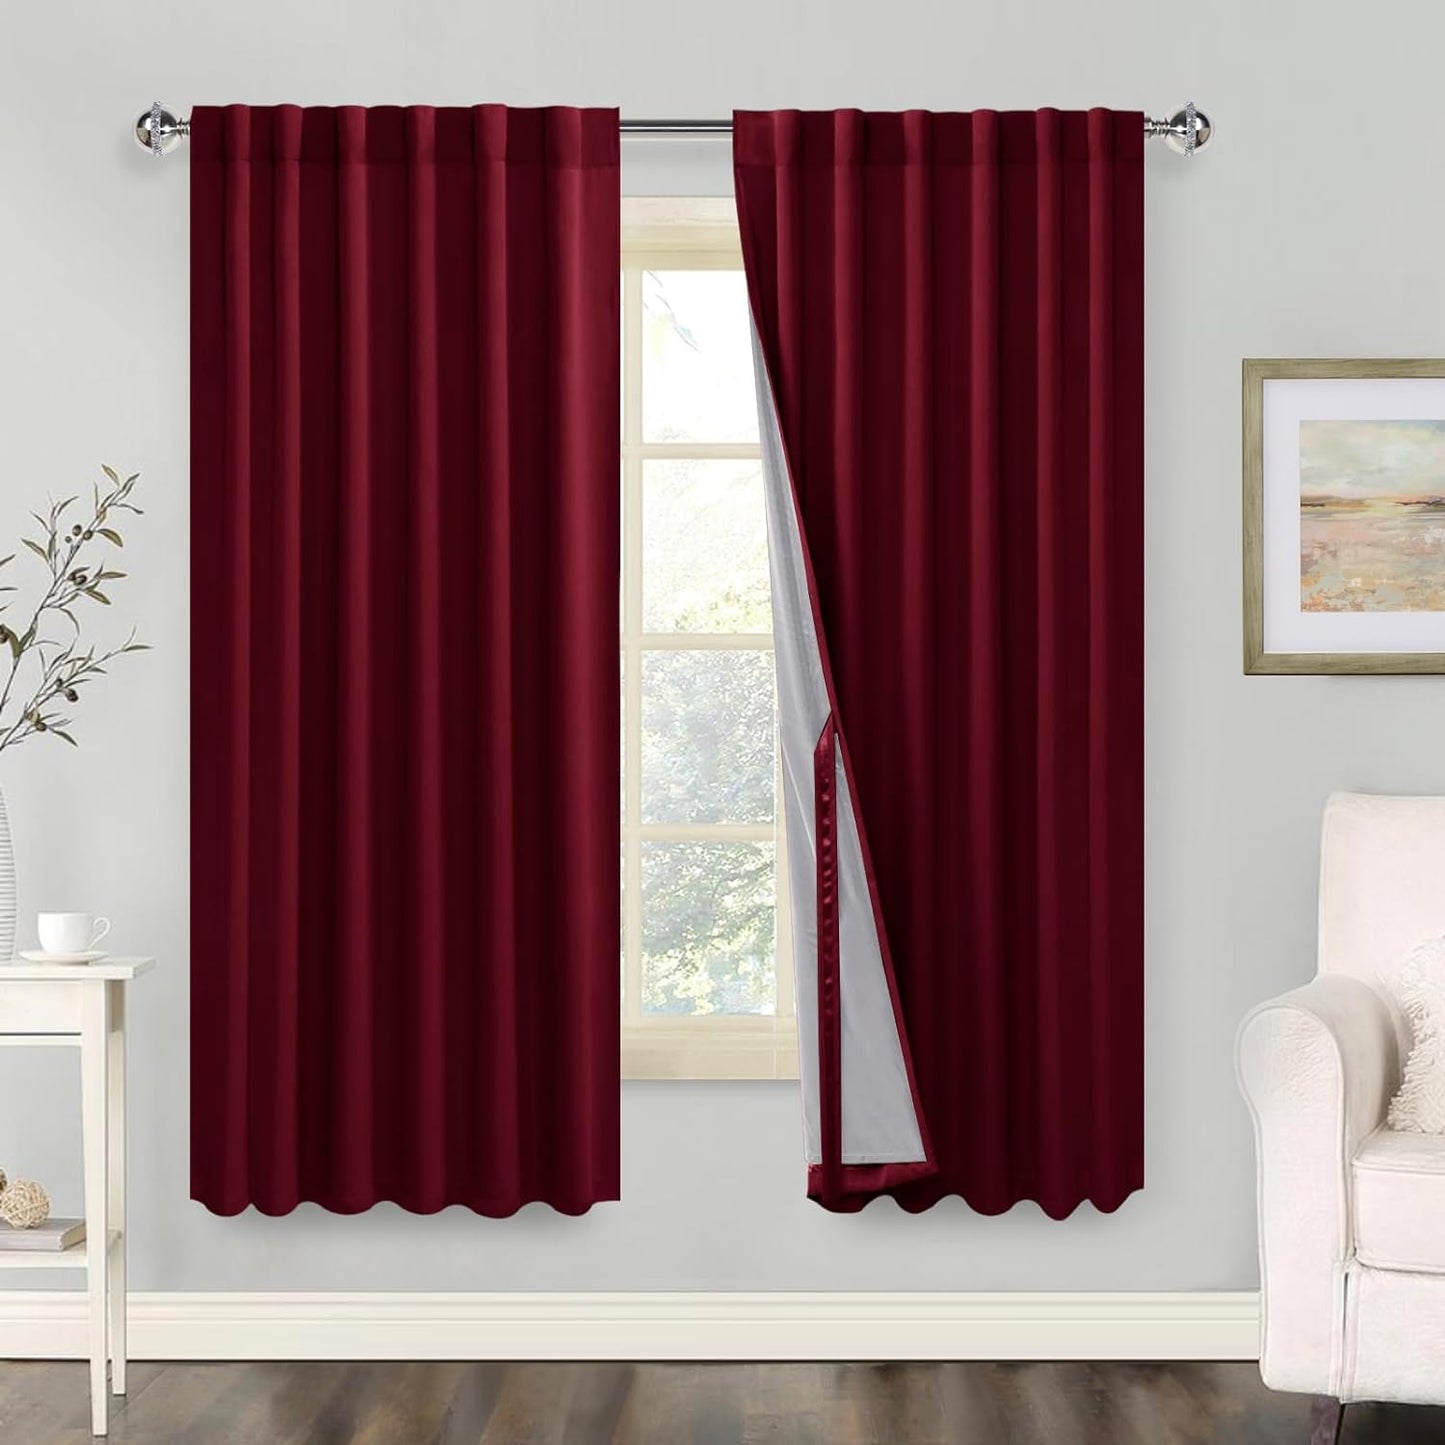 100% Blackout Curtains 2 Panels with Tiebacks- Heat and Full Light Blocking Window Treatment with Black Liner for Bedroom/Nursery, Rod Pocket & Back Tab，White, W52 X L84 Inches Long, Set of 2  XWZO Burgundy W52" X L63"|2 Panels 